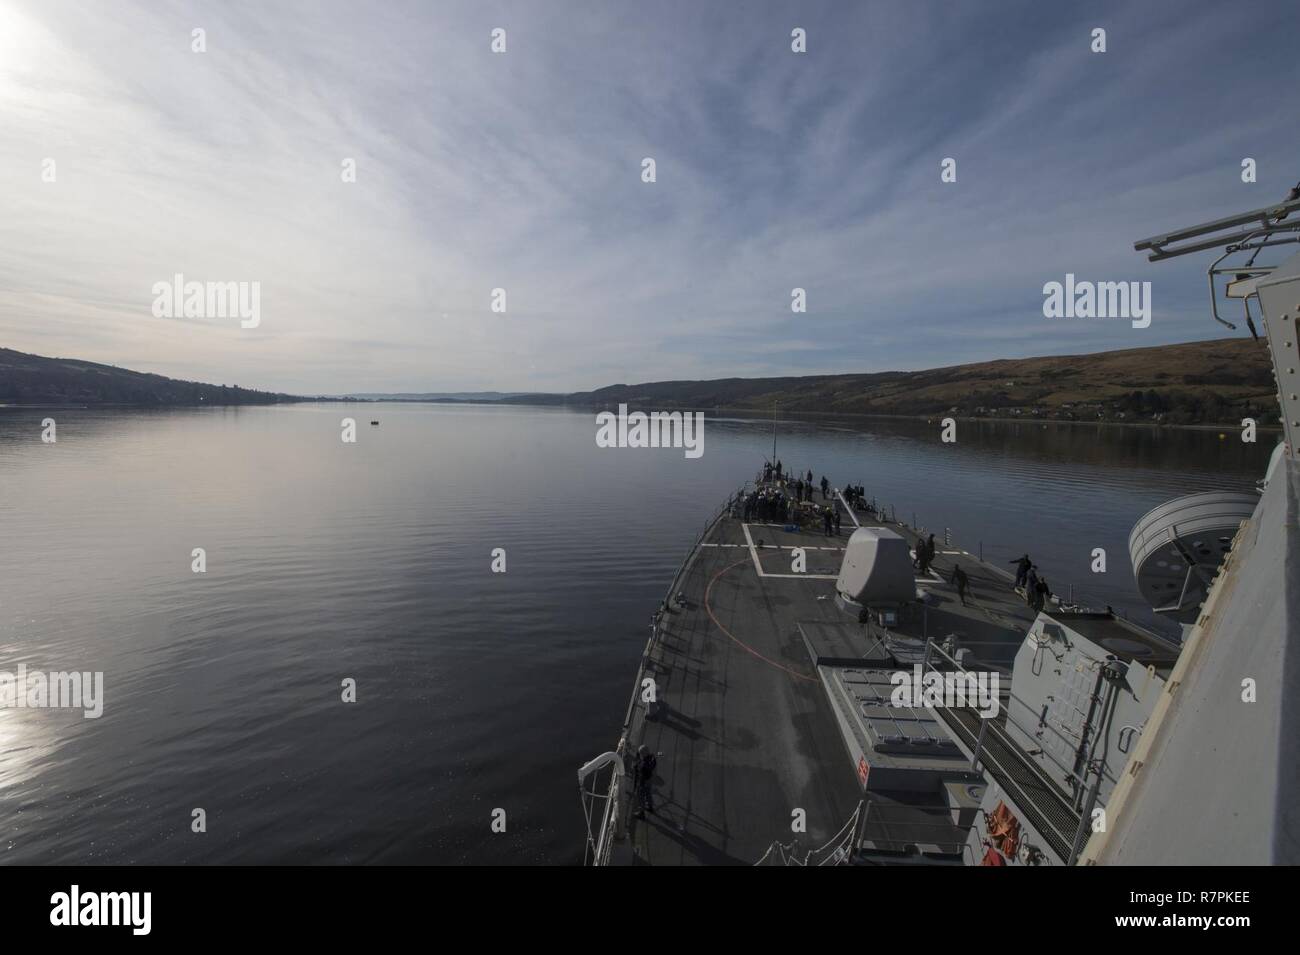 FASLANE, Scotland - (March 26, 2017) - USS Carney (DDG 64) gets underway from Faslane, Scotland March 26, 2017. Carney, an Arleigh Burke-class guided-missile destroyer, forward-deployed to Rota, Spain, is conducting its third patrol in the U.S. 6th Fleet area of operations in support of U.S. national security interests in Europe. Stock Photo